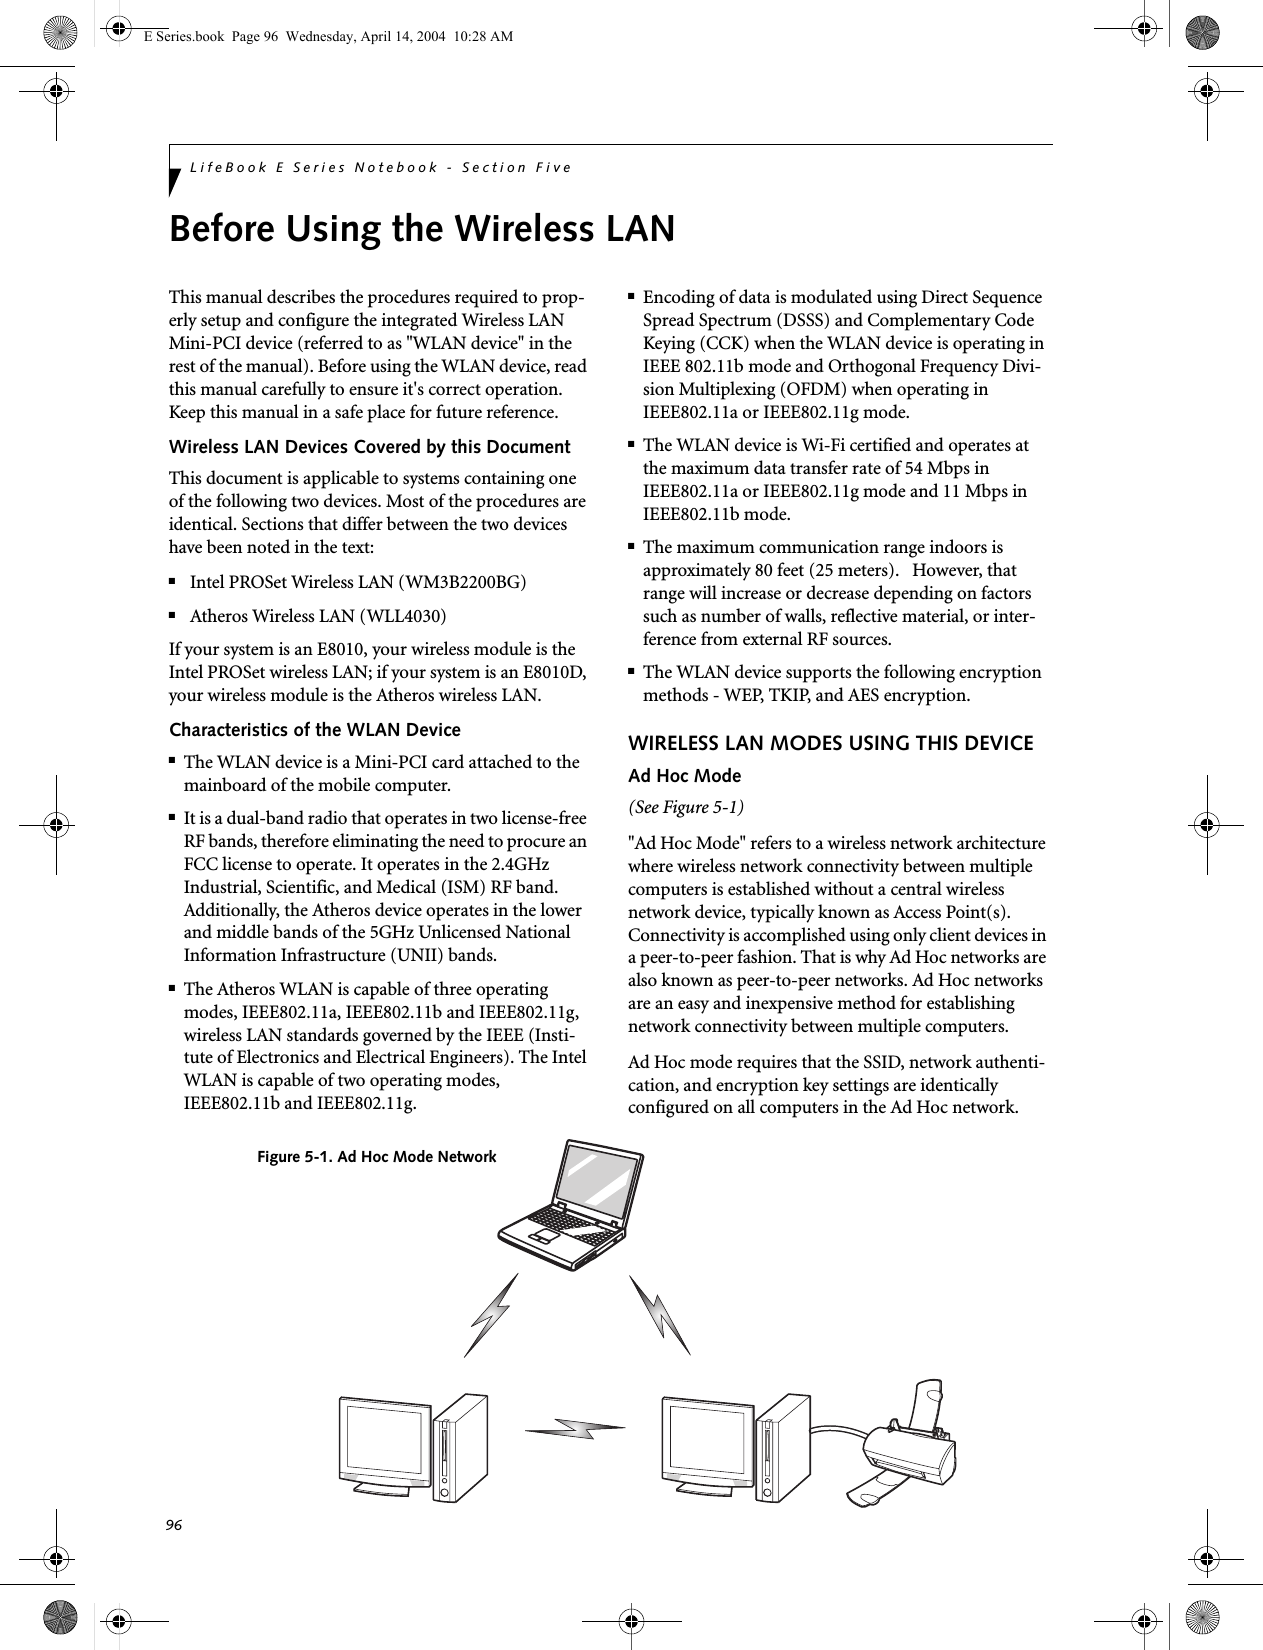 96LifeBook E Series Notebook - Section FiveBefore Using the Wireless LANThis manual describes the procedures required to prop-erly setup and configure the integrated Wireless LAN Mini-PCI device (referred to as &quot;WLAN device&quot; in the rest of the manual). Before using the WLAN device, read this manual carefully to ensure it&apos;s correct operation. Keep this manual in a safe place for future reference.Wireless LAN Devices Covered by this DocumentThis document is applicable to systems containing one of the following two devices. Most of the procedures are identical. Sections that differ between the two devices have been noted in the text:■Intel PROSet Wireless LAN (WM3B2200BG)■Atheros Wireless LAN (WLL4030)If your system is an E8010, your wireless module is the Intel PROSet wireless LAN; if your system is an E8010D, your wireless module is the Atheros wireless LAN.Characteristics of the WLAN Device■The WLAN device is a Mini-PCI card attached to the mainboard of the mobile computer. ■It is a dual-band radio that operates in two license-free RF bands, therefore eliminating the need to procure an FCC license to operate. It operates in the 2.4GHz Industrial, Scientific, and Medical (ISM) RF band. Additionally, the Atheros device operates in the lower and middle bands of the 5GHz Unlicensed National Information Infrastructure (UNII) bands. ■The Atheros WLAN is capable of three operating modes, IEEE802.11a, IEEE802.11b and IEEE802.11g, wireless LAN standards governed by the IEEE (Insti-tute of Electronics and Electrical Engineers). The Intel WLAN is capable of two operating modes, IEEE802.11b and IEEE802.11g.■Encoding of data is modulated using Direct Sequence Spread Spectrum (DSSS) and Complementary Code Keying (CCK) when the WLAN device is operating in IEEE 802.11b mode and Orthogonal Frequency Divi-sion Multiplexing (OFDM) when operating in IEEE802.11a or IEEE802.11g mode. ■The WLAN device is Wi-Fi certified and operates at the maximum data transfer rate of 54 Mbps in IEEE802.11a or IEEE802.11g mode and 11 Mbps in IEEE802.11b mode.■The maximum communication range indoors is approximately 80 feet (25 meters).   However, that range will increase or decrease depending on factors such as number of walls, reflective material, or inter-ference from external RF sources.■The WLAN device supports the following encryption methods - WEP, TKIP, and AES encryption.WIRELESS LAN MODES USING THIS DEVICEAd Hoc Mode (See Figure 5-1)&quot;Ad Hoc Mode&quot; refers to a wireless network architecture where wireless network connectivity between multiple computers is established without a central wireless network device, typically known as Access Point(s). Connectivity is accomplished using only client devices in a peer-to-peer fashion. That is why Ad Hoc networks are also known as peer-to-peer networks. Ad Hoc networks are an easy and inexpensive method for establishing network connectivity between multiple computers.Ad Hoc mode requires that the SSID, network authenti-cation, and encryption key settings are identically configured on all computers in the Ad Hoc network. Figure 5-1. Ad Hoc Mode NetworkE Series.book  Page 96  Wednesday, April 14, 2004  10:28 AM